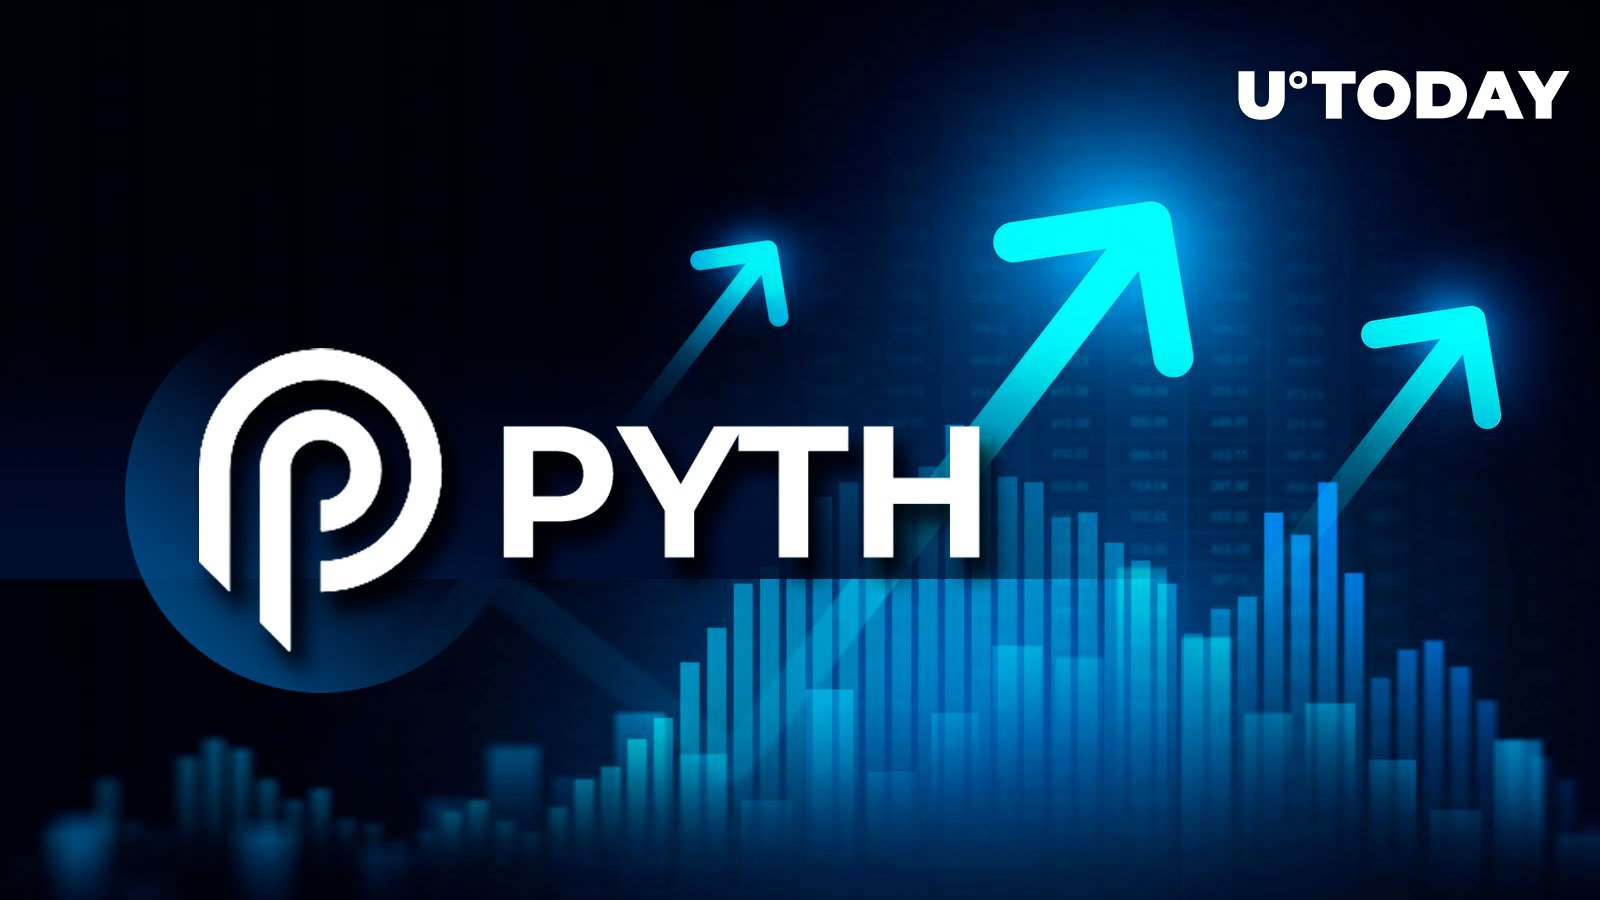 Solana-Based PYTH Token Soars 10% Following Pyth Network’s Phase 2 Airdrop